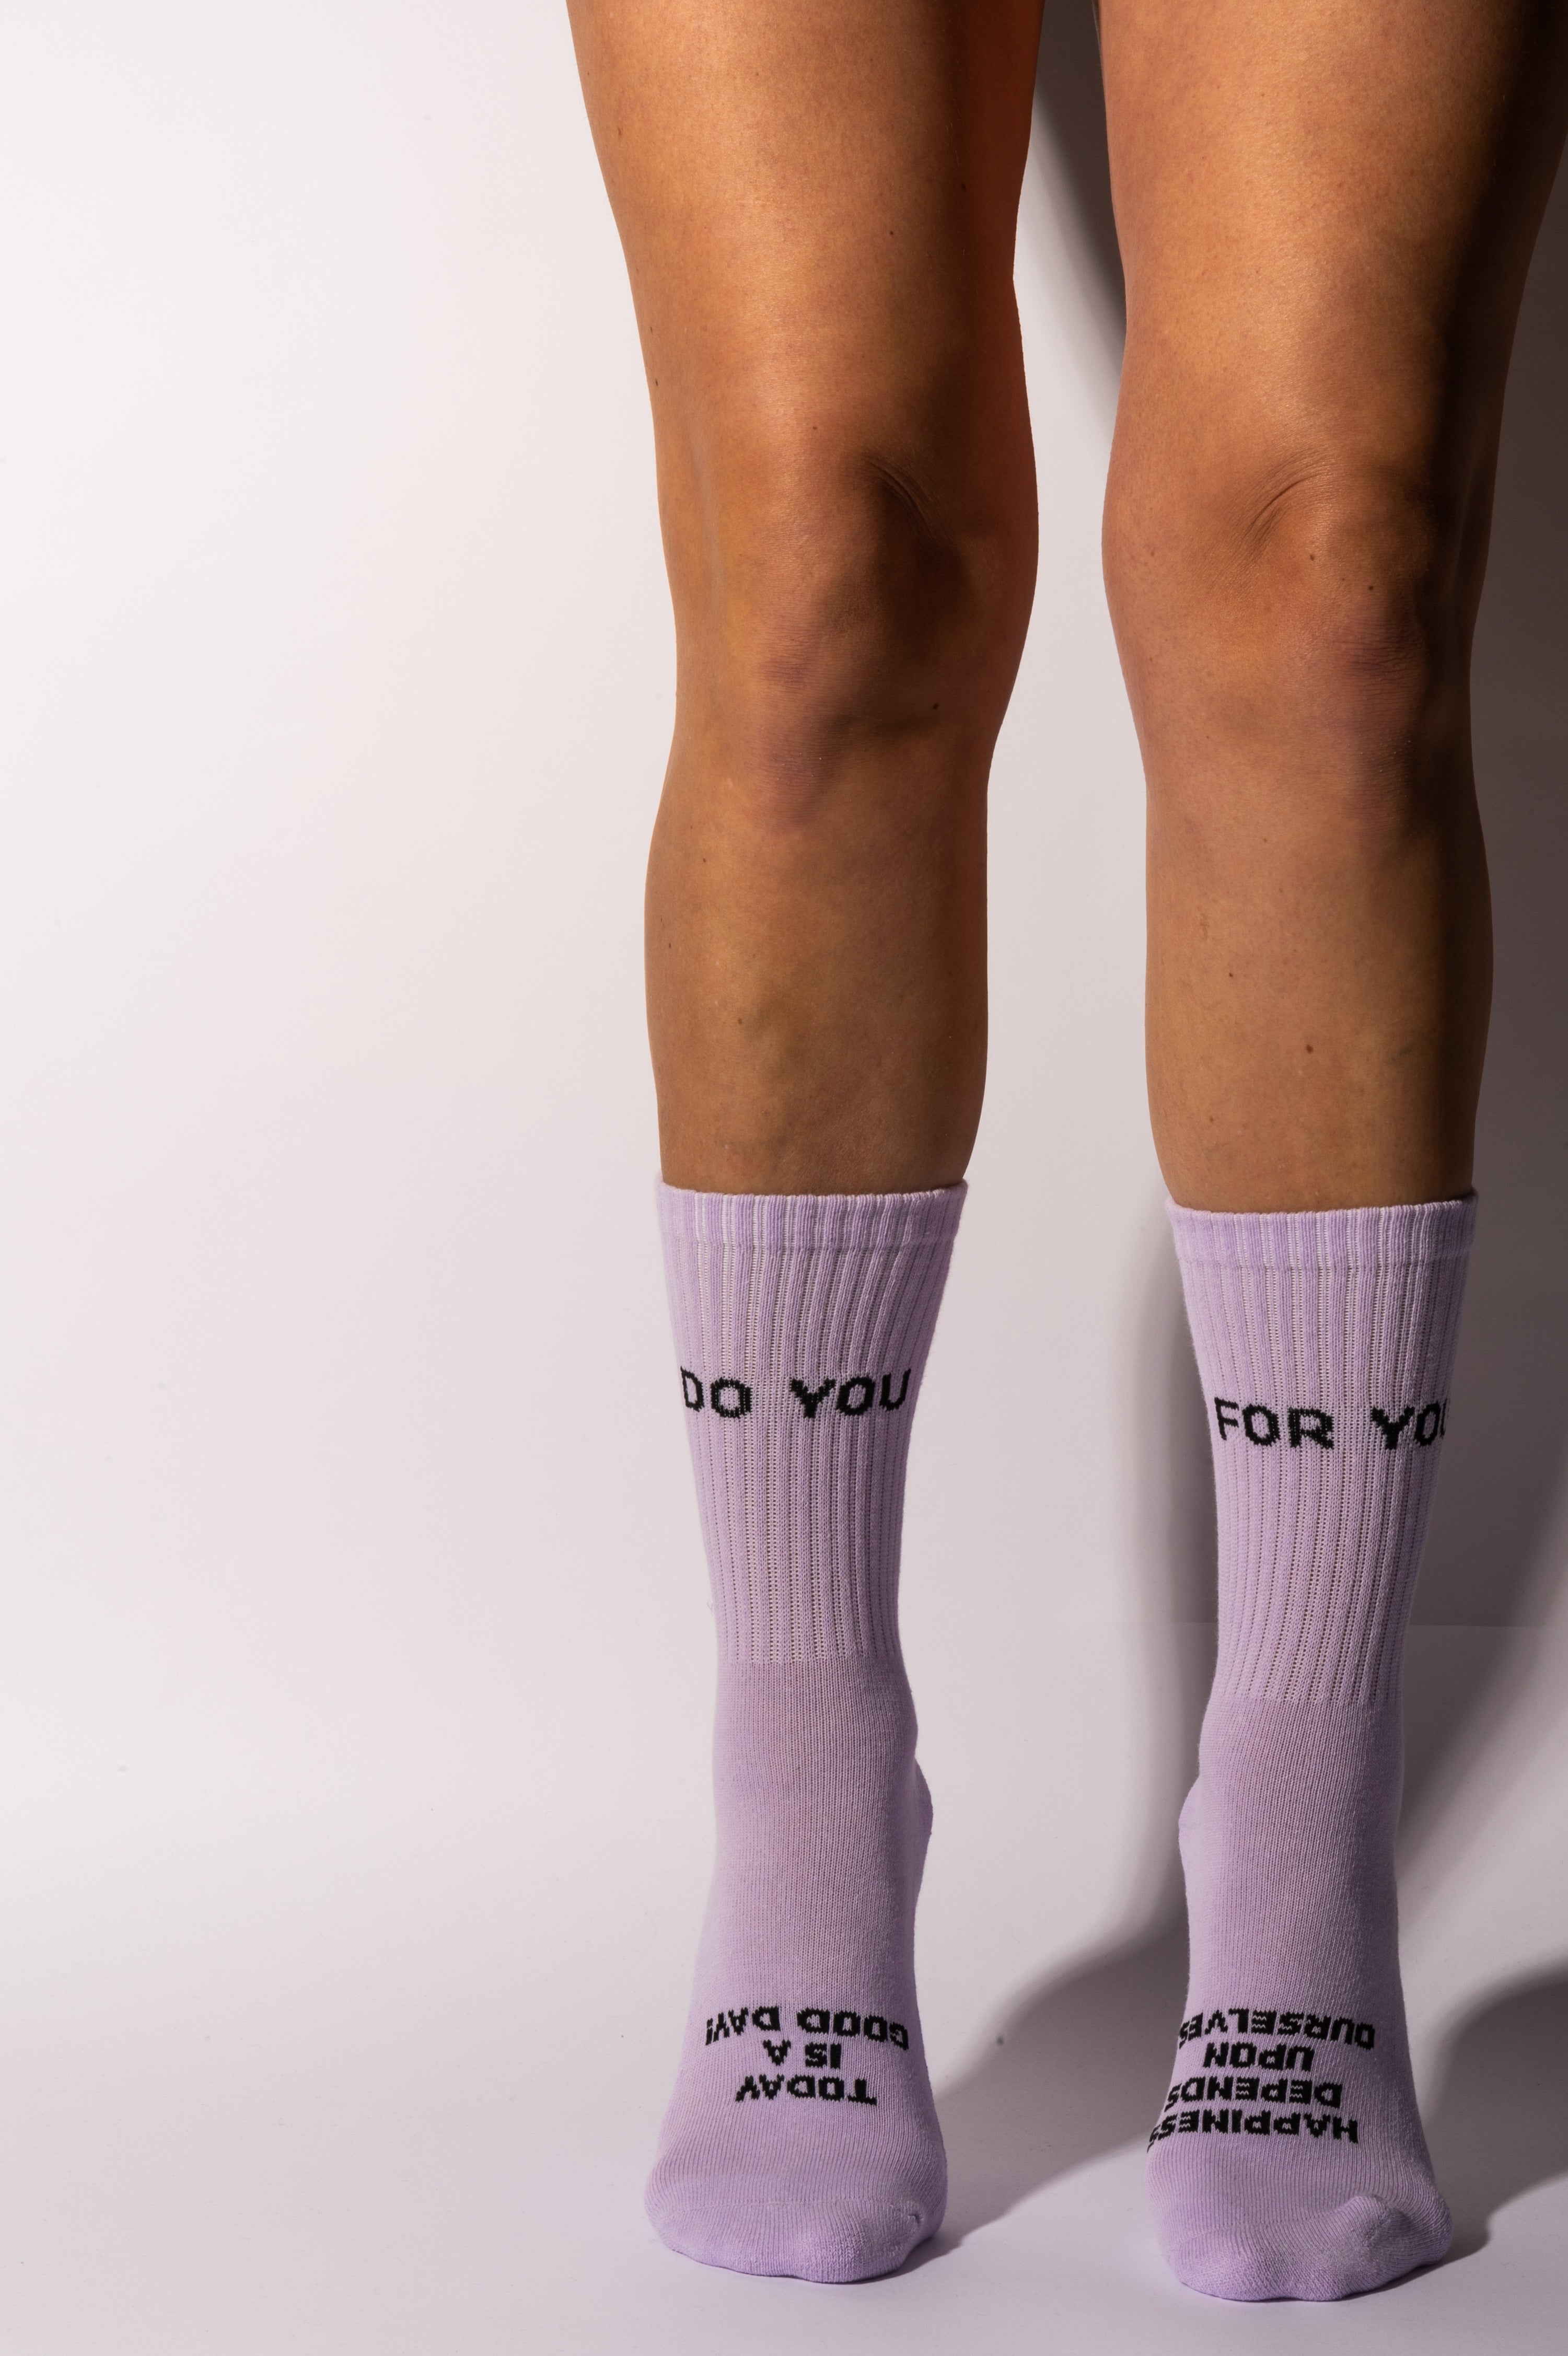 FOR YOU Women's Crew Socks - Lilac